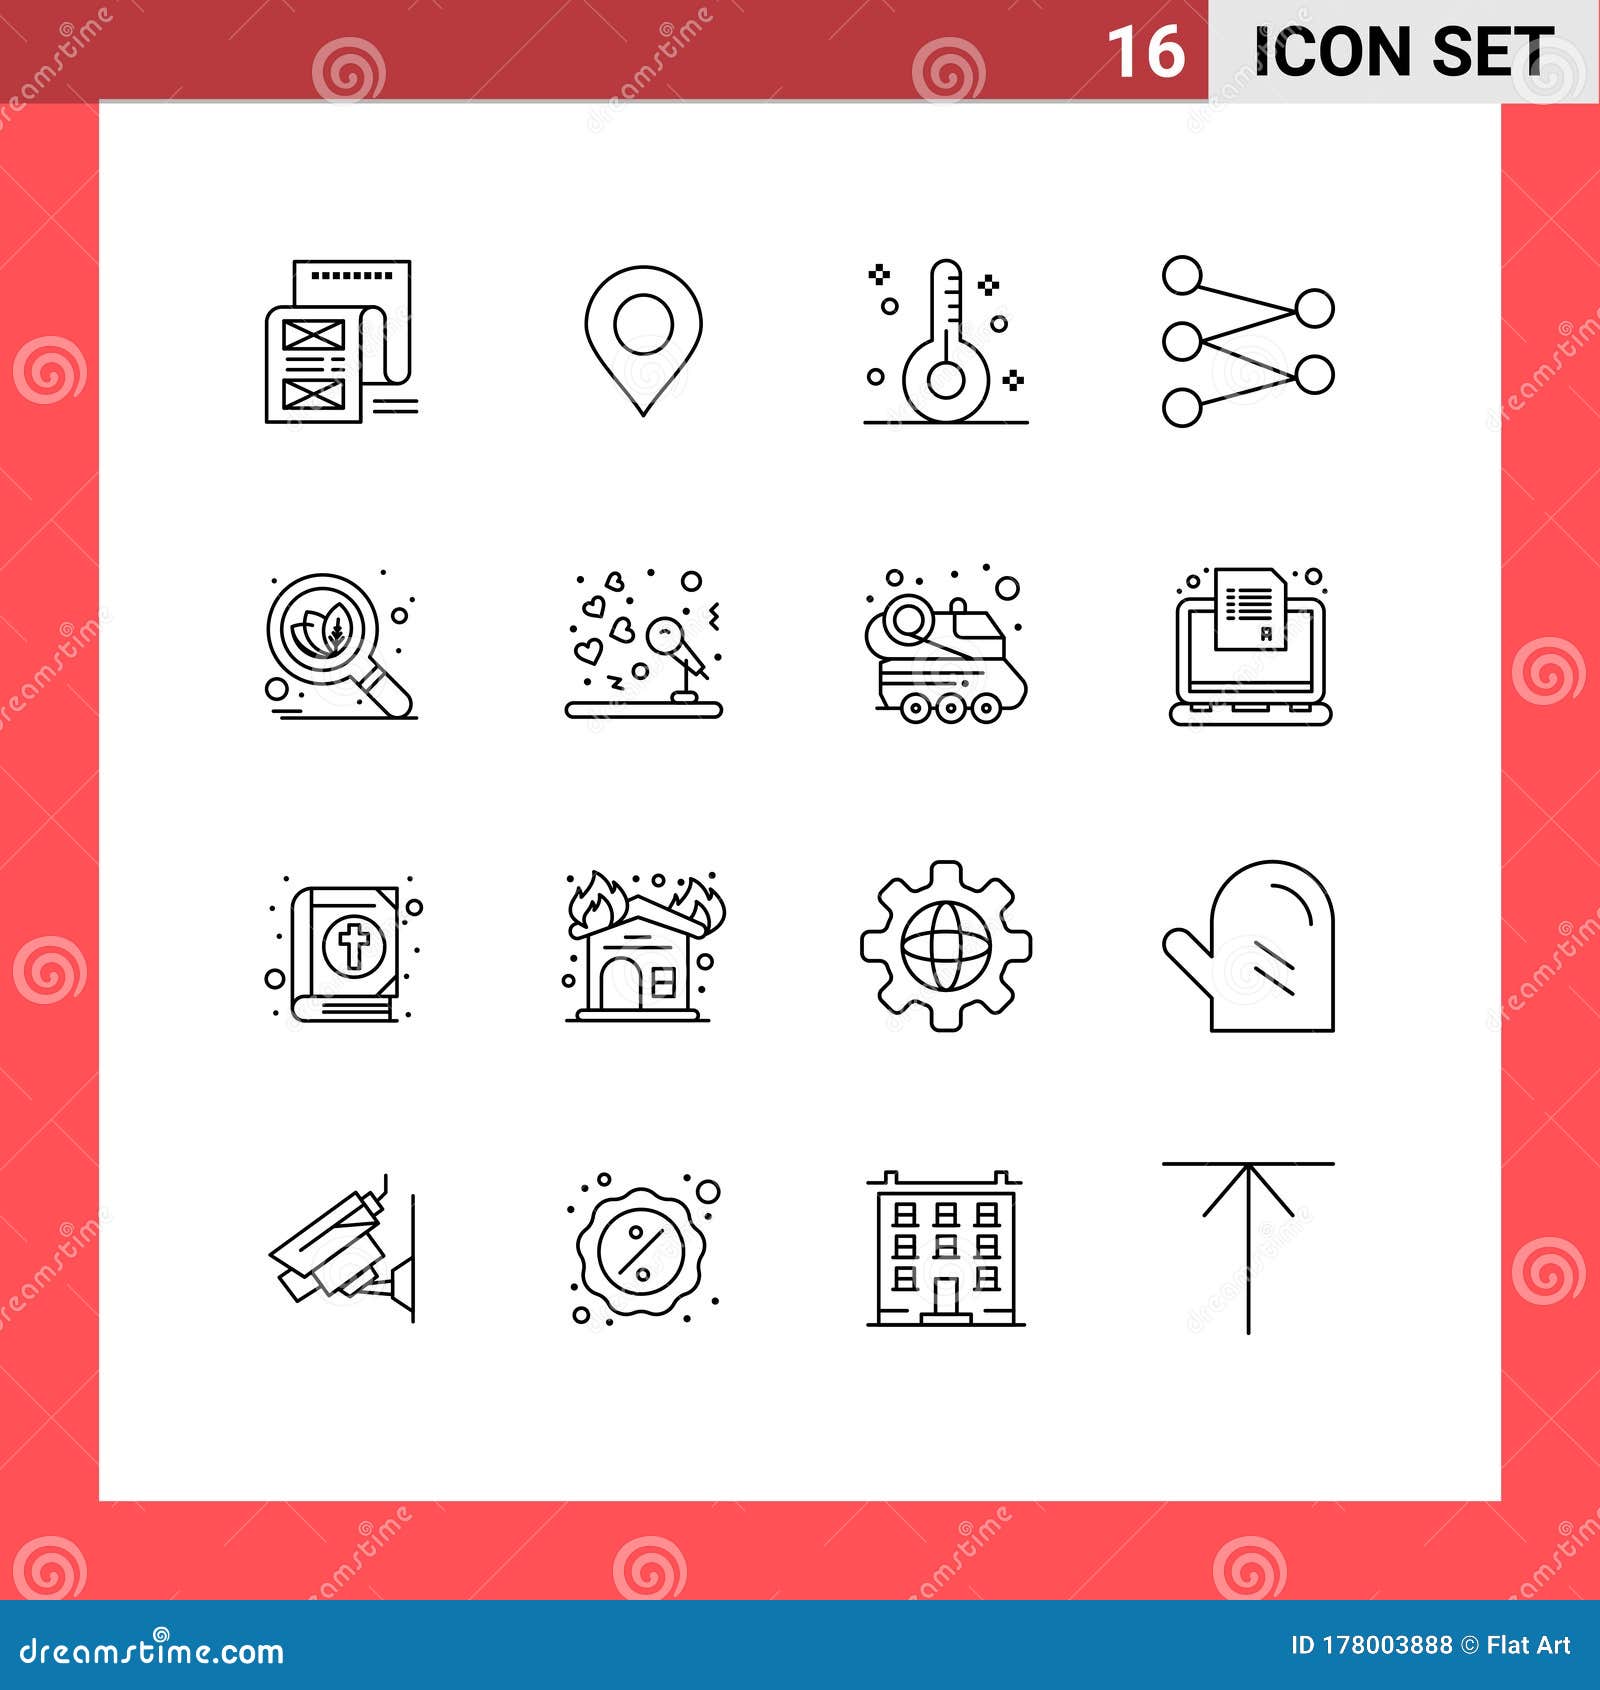 16 creative icons modern signs and s of organic, science, world, figure, health